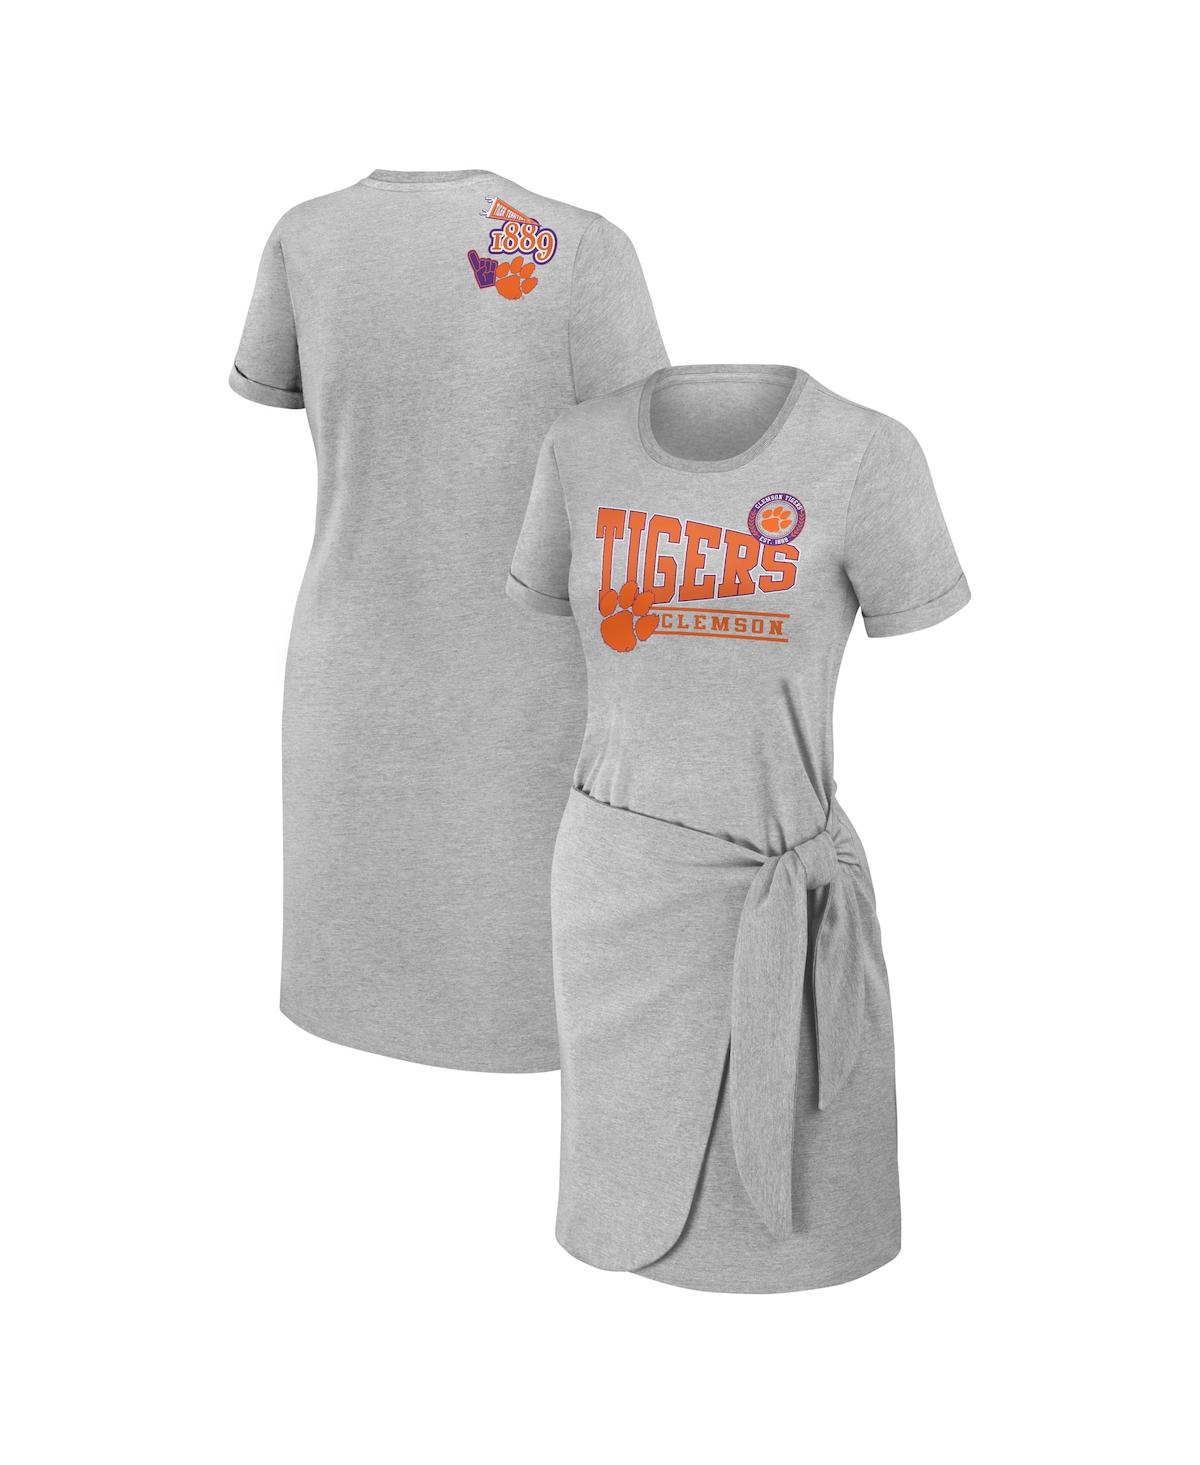 Wear By Erin Andrews Women's  Heather Gray Clemson Tigers Knotted T-shirt Dress